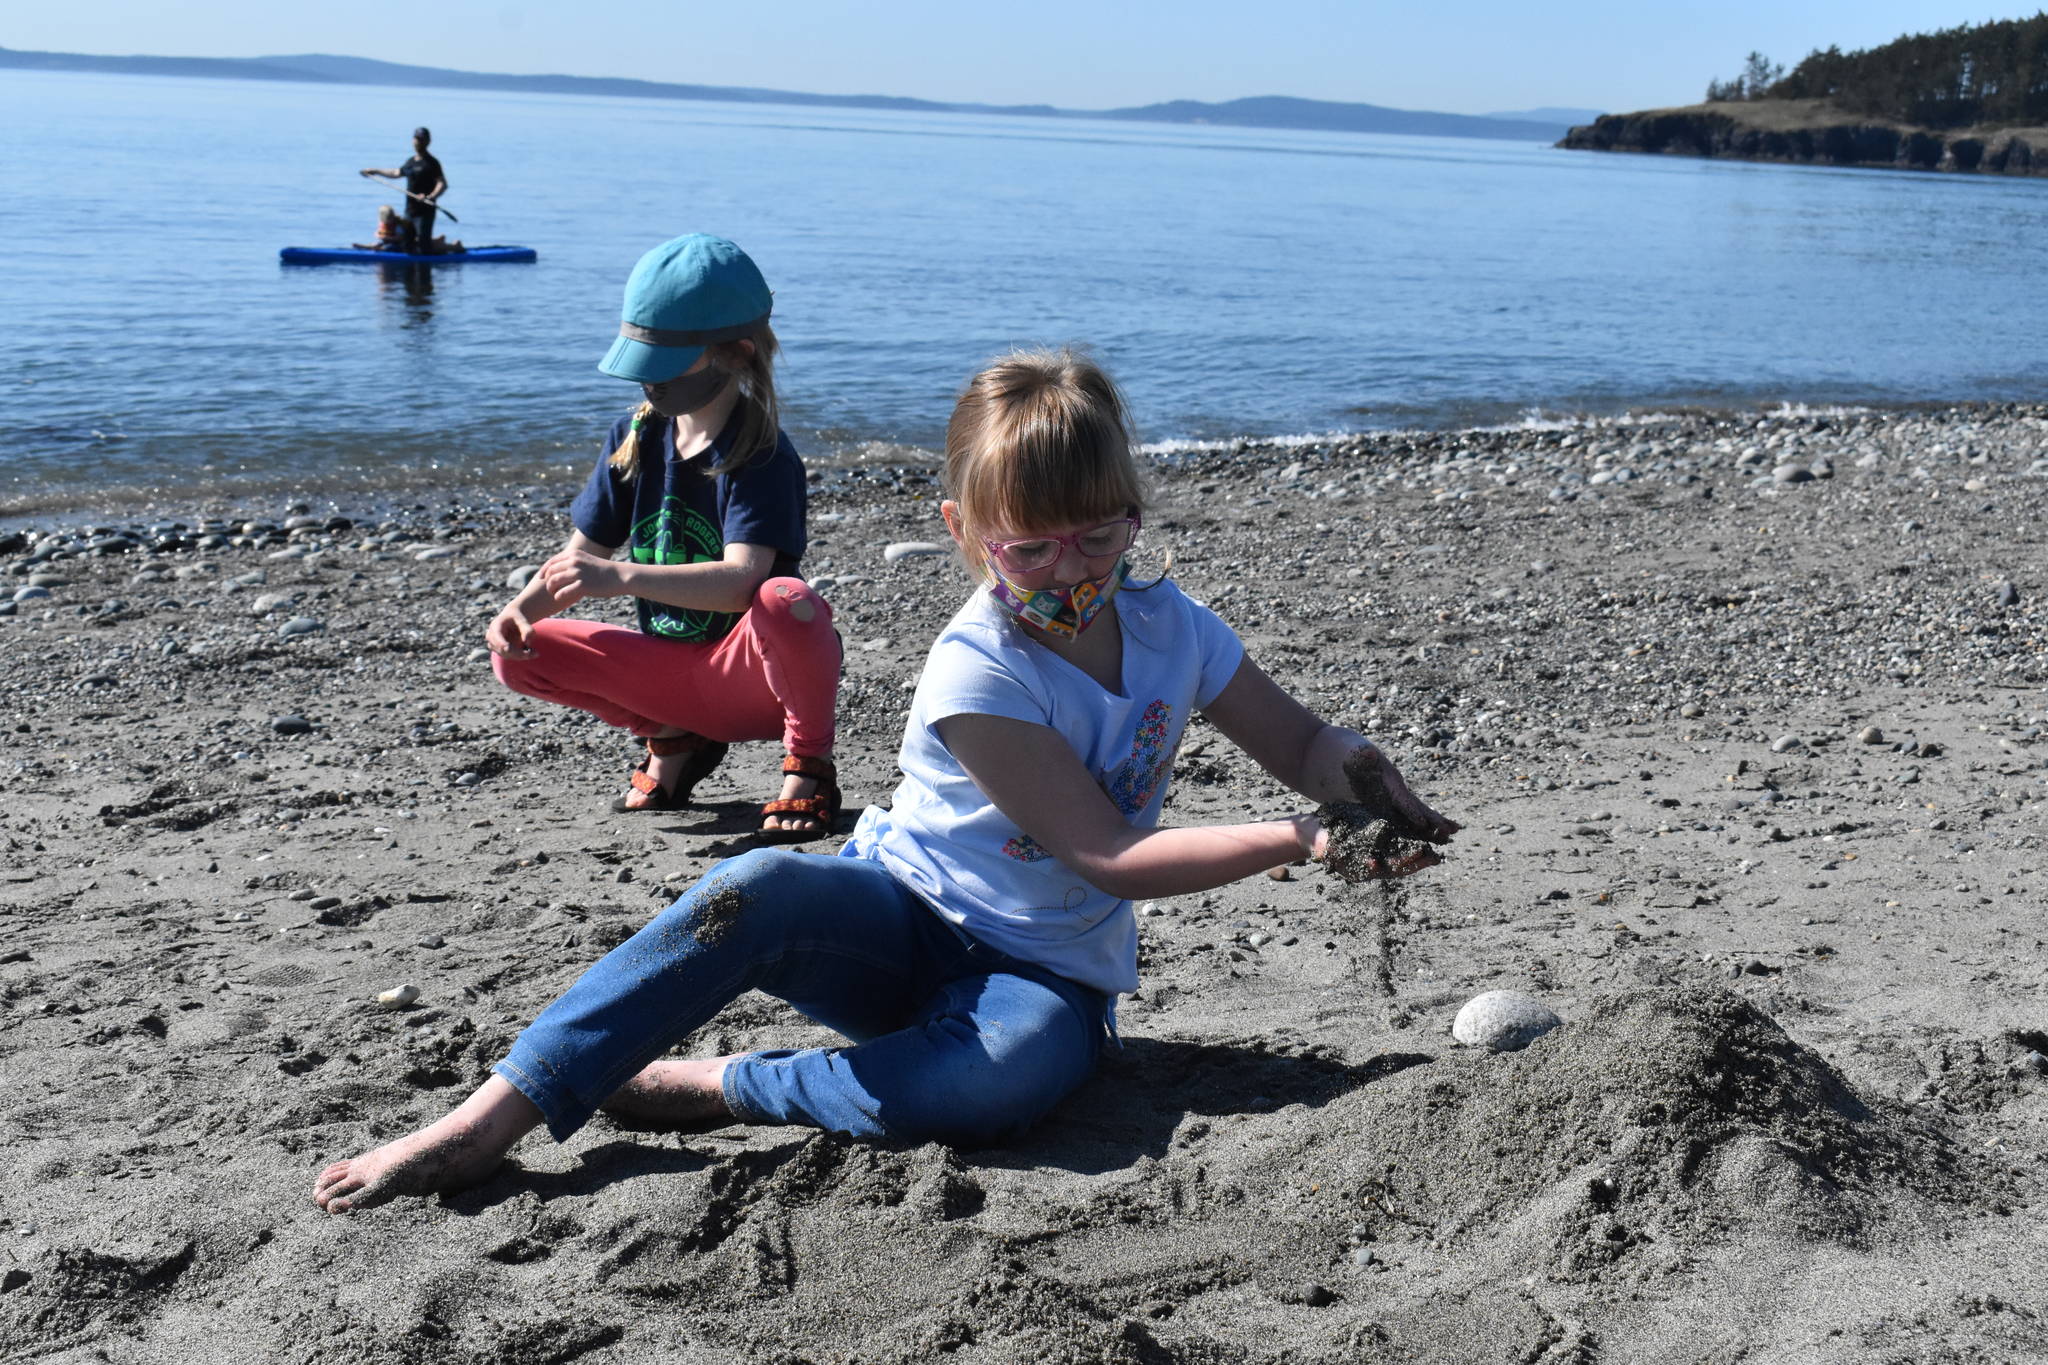 Six-year-olds Tilly Gignoux, left, and Kaylee Martin, right, construct a chair from sand at West Beach in Deception Pass State Park on Thursday afternoon.
(Photo by Emily Gilbert/Whidbey News-Times)